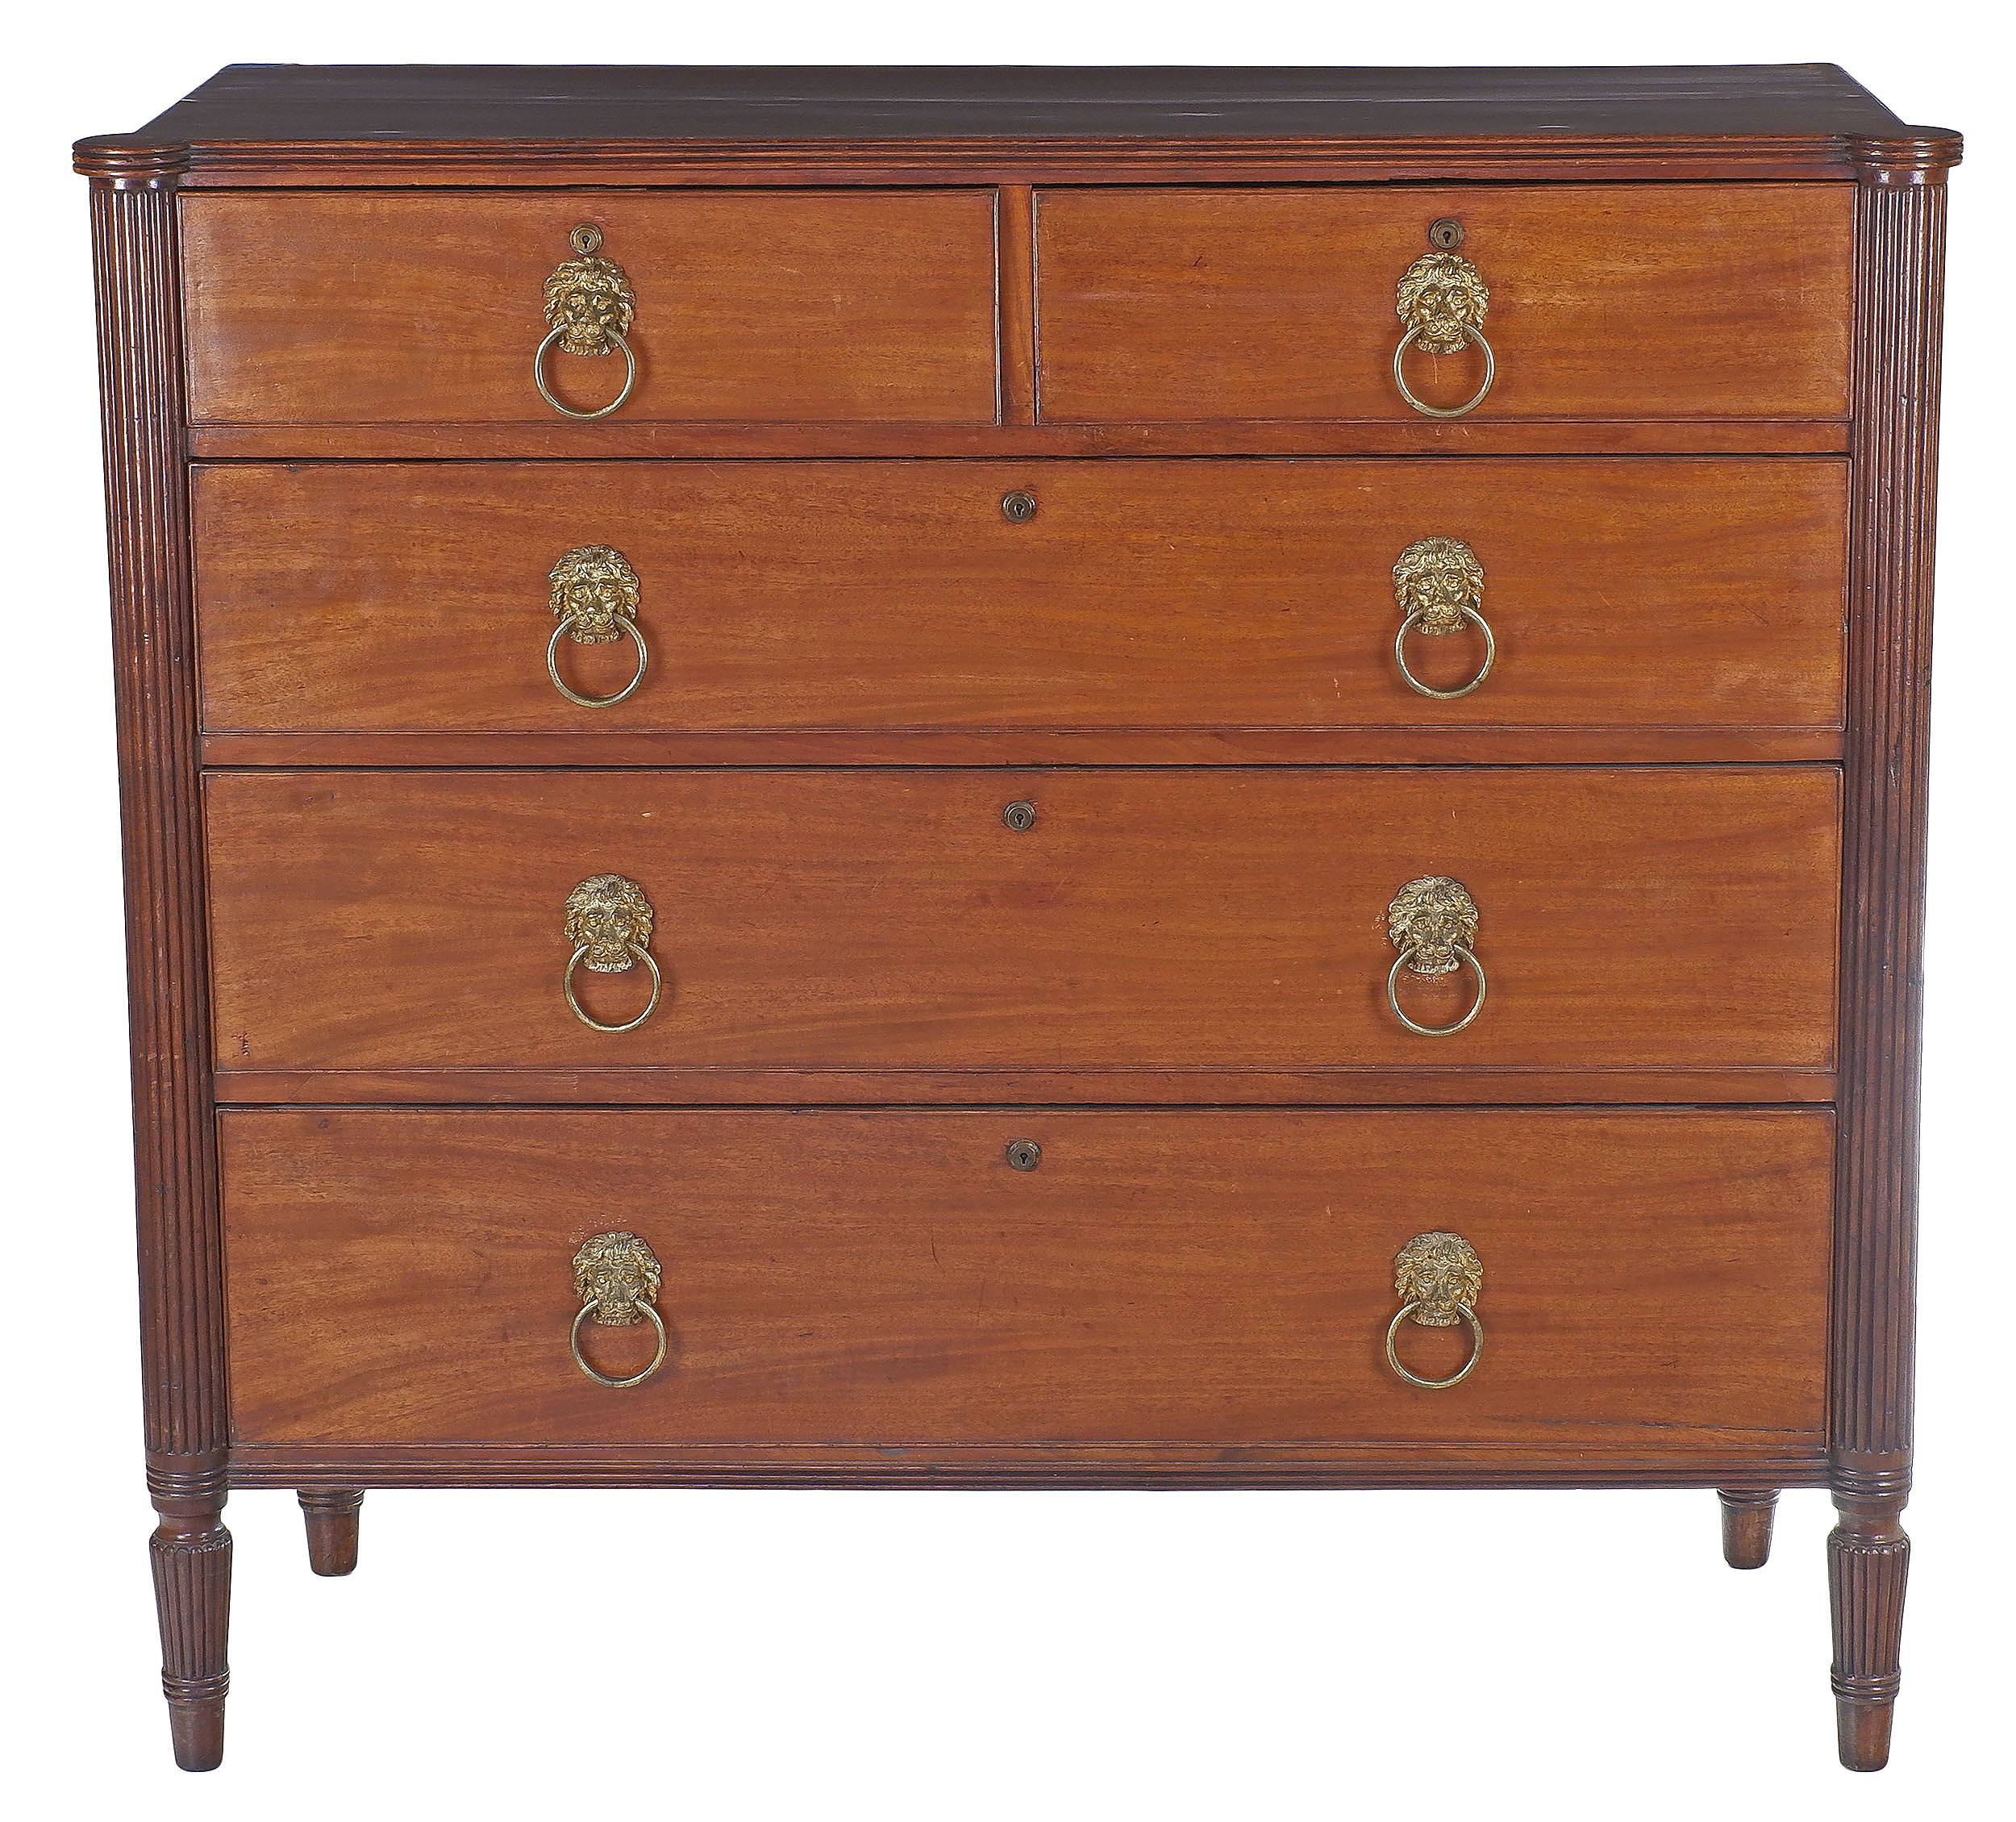 'Regency Gillows Type Mahogany Chest of Drawers with Reeded Columns Lions Head Brass Handles and Bramah Locks Circa 1820'